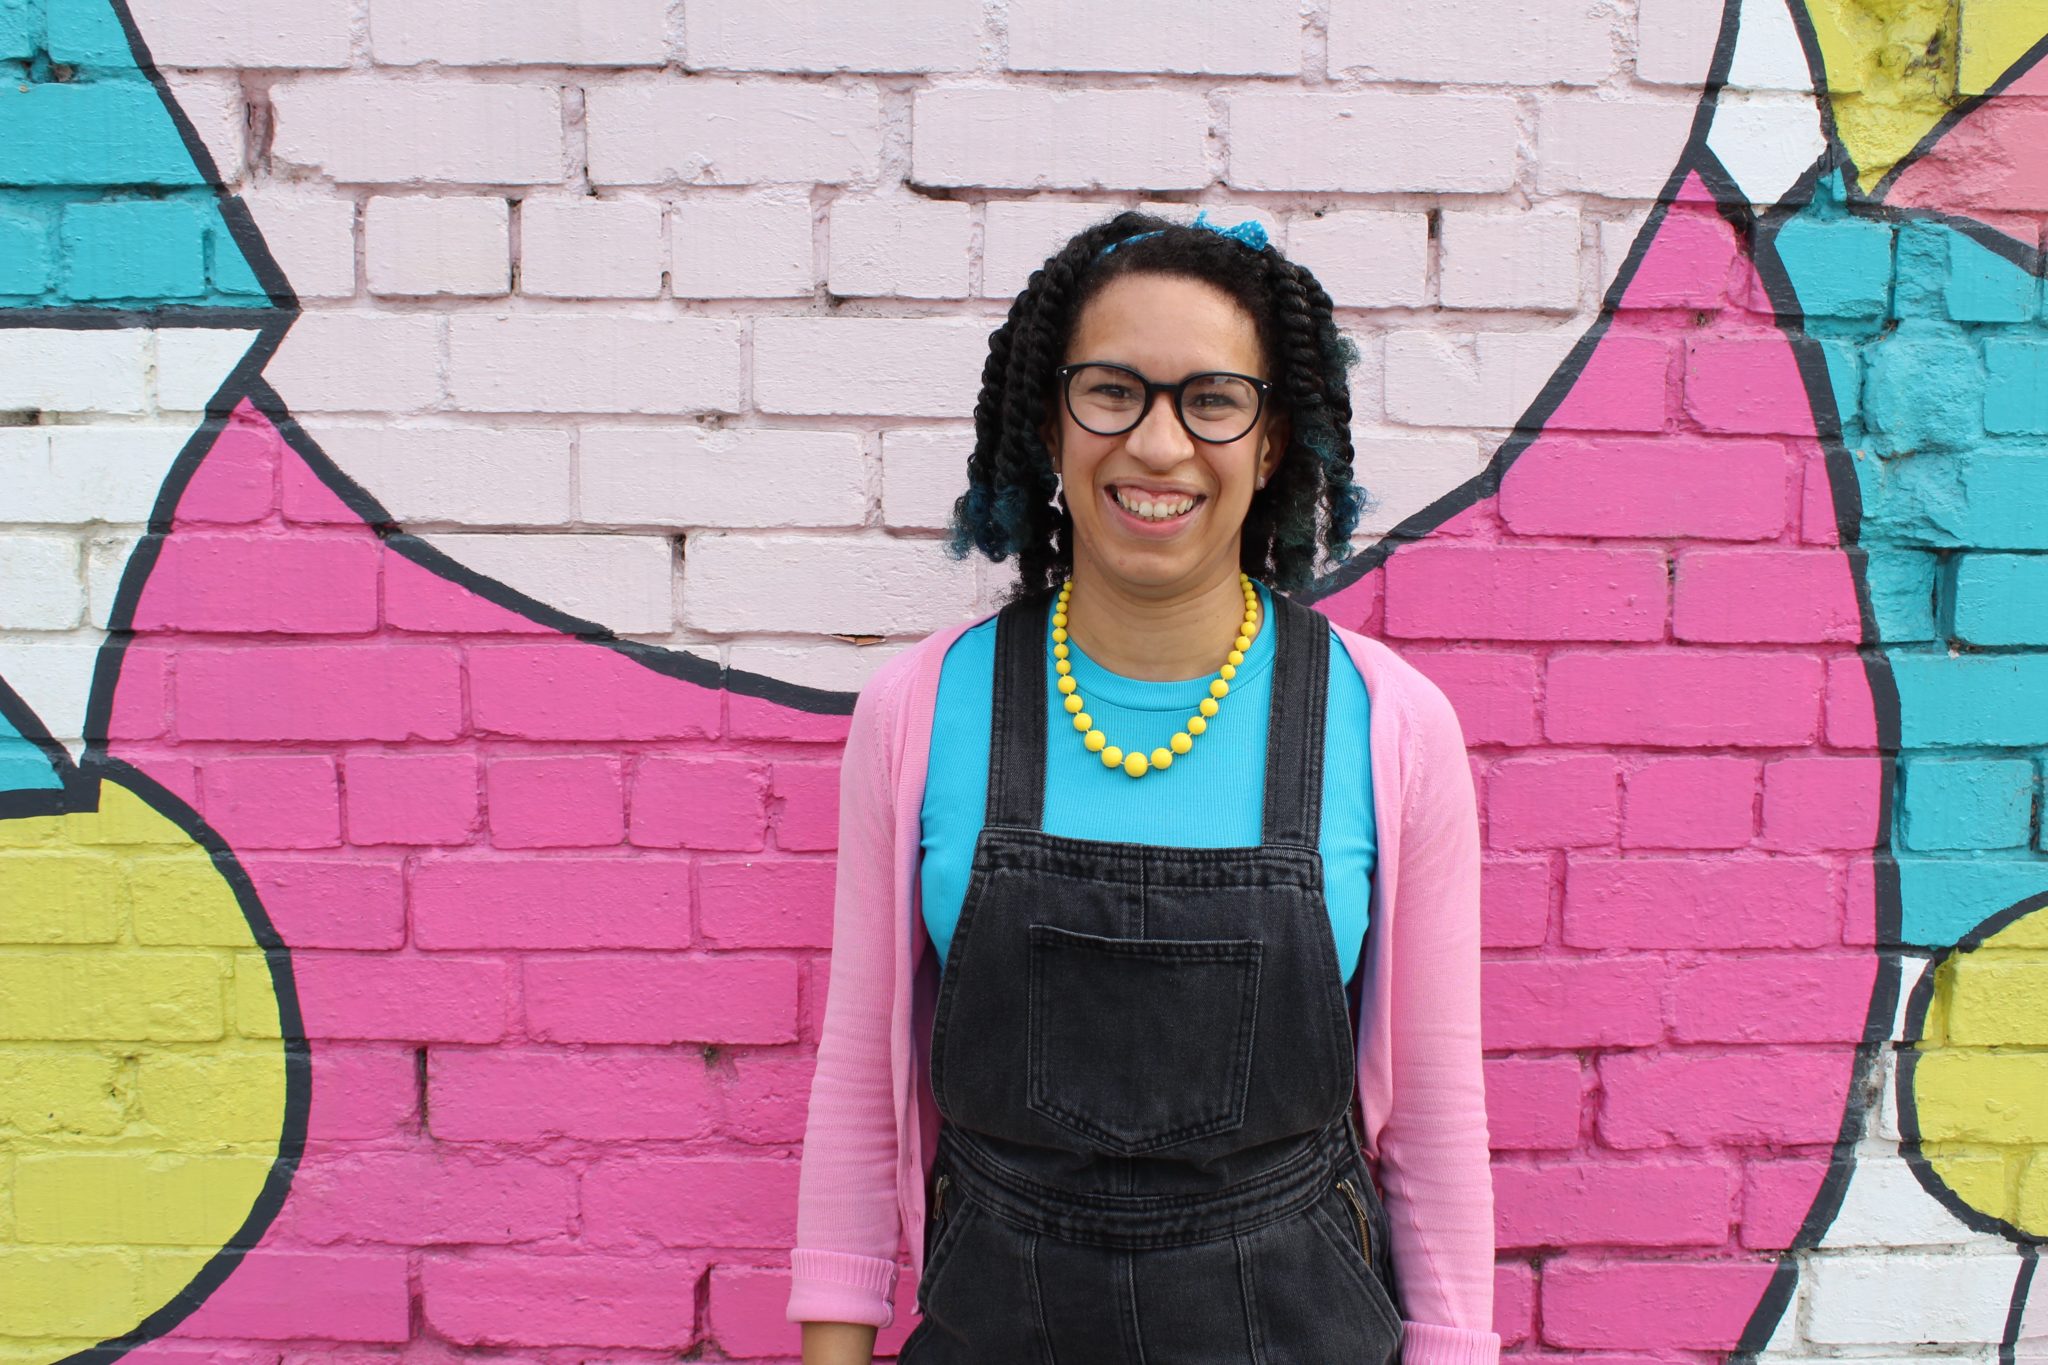 A Black woman with mid length hair stands in front a painted pink brick wall. She is wearing a turquoise tee with black dungarees and pink cardigan accessorised with bright yellow beaded necklace. She has on glasses and is smiling with an open smile at the camera